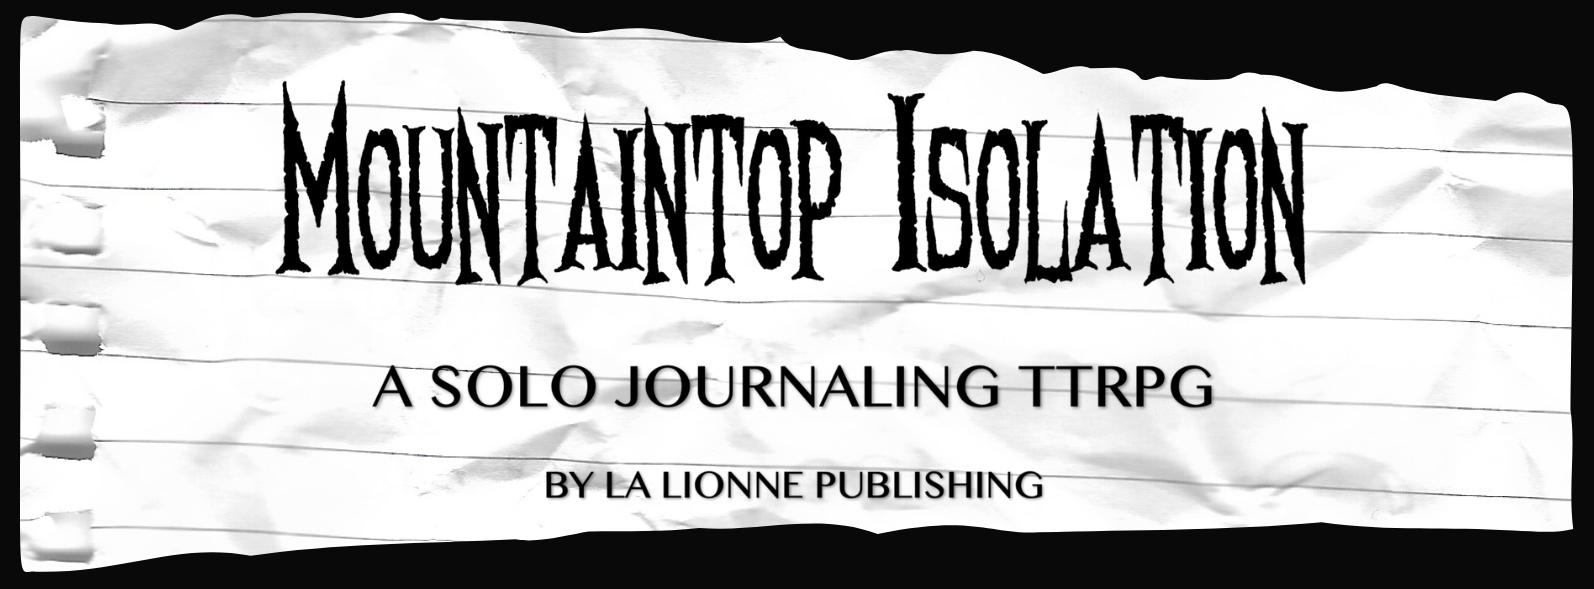 Mountaintop Isolation: A Wretched & Alone Solo Game